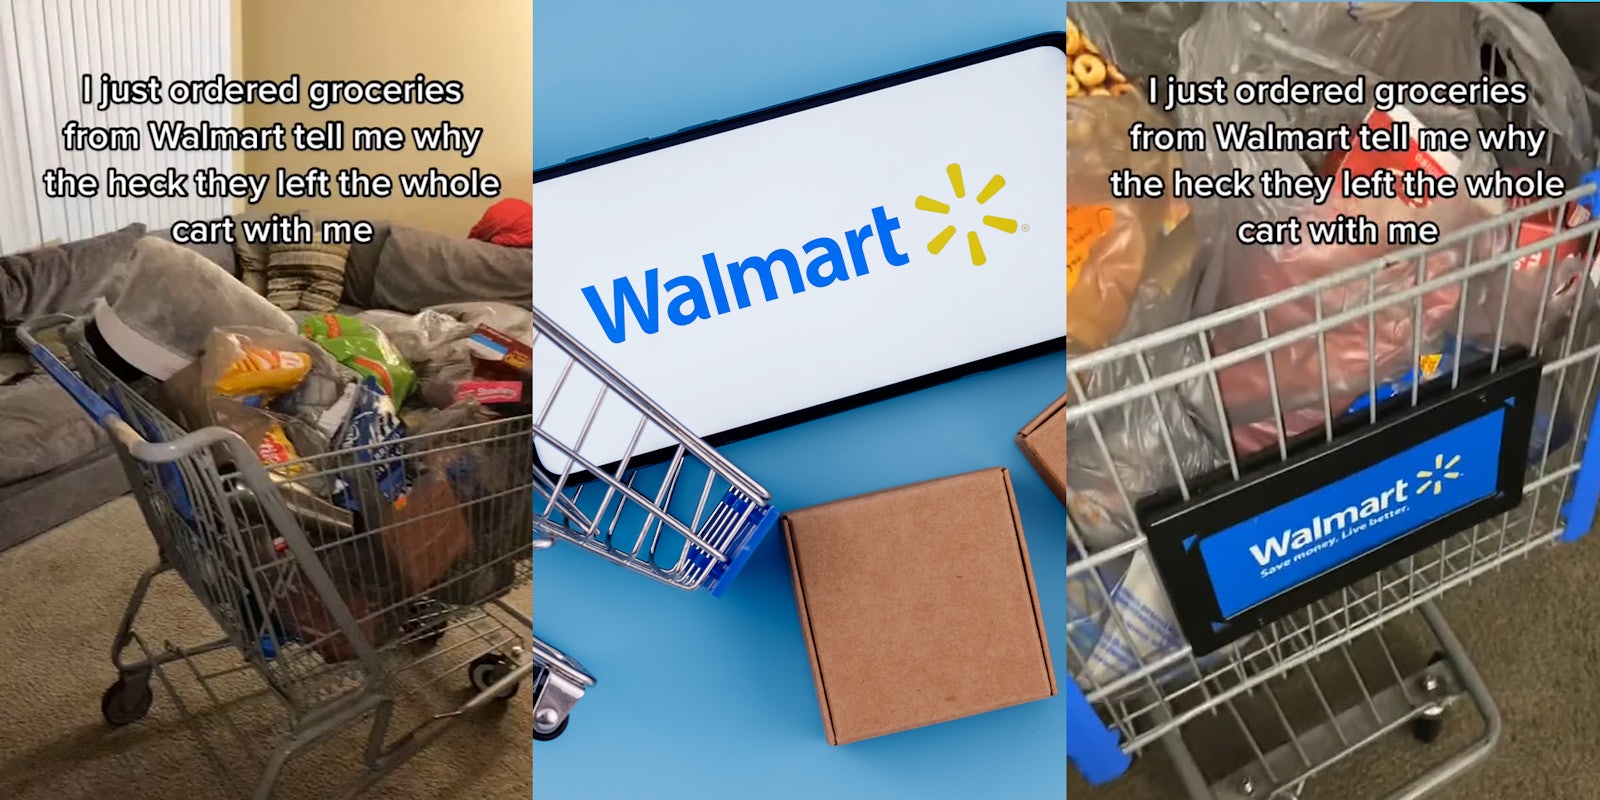 Walmart shopping cart in living room with groceries with caption 'I just ordered groceries from Walmart so tell me why the heck they left the whole cart with me' (l) Walmart on phone with shopping cart and boxes in front of blue background (c) Walmart shopping cart in living room with groceries with caption 'I just ordered groceries from Walmart so tell me why the heck they left the whole cart with me' (r)